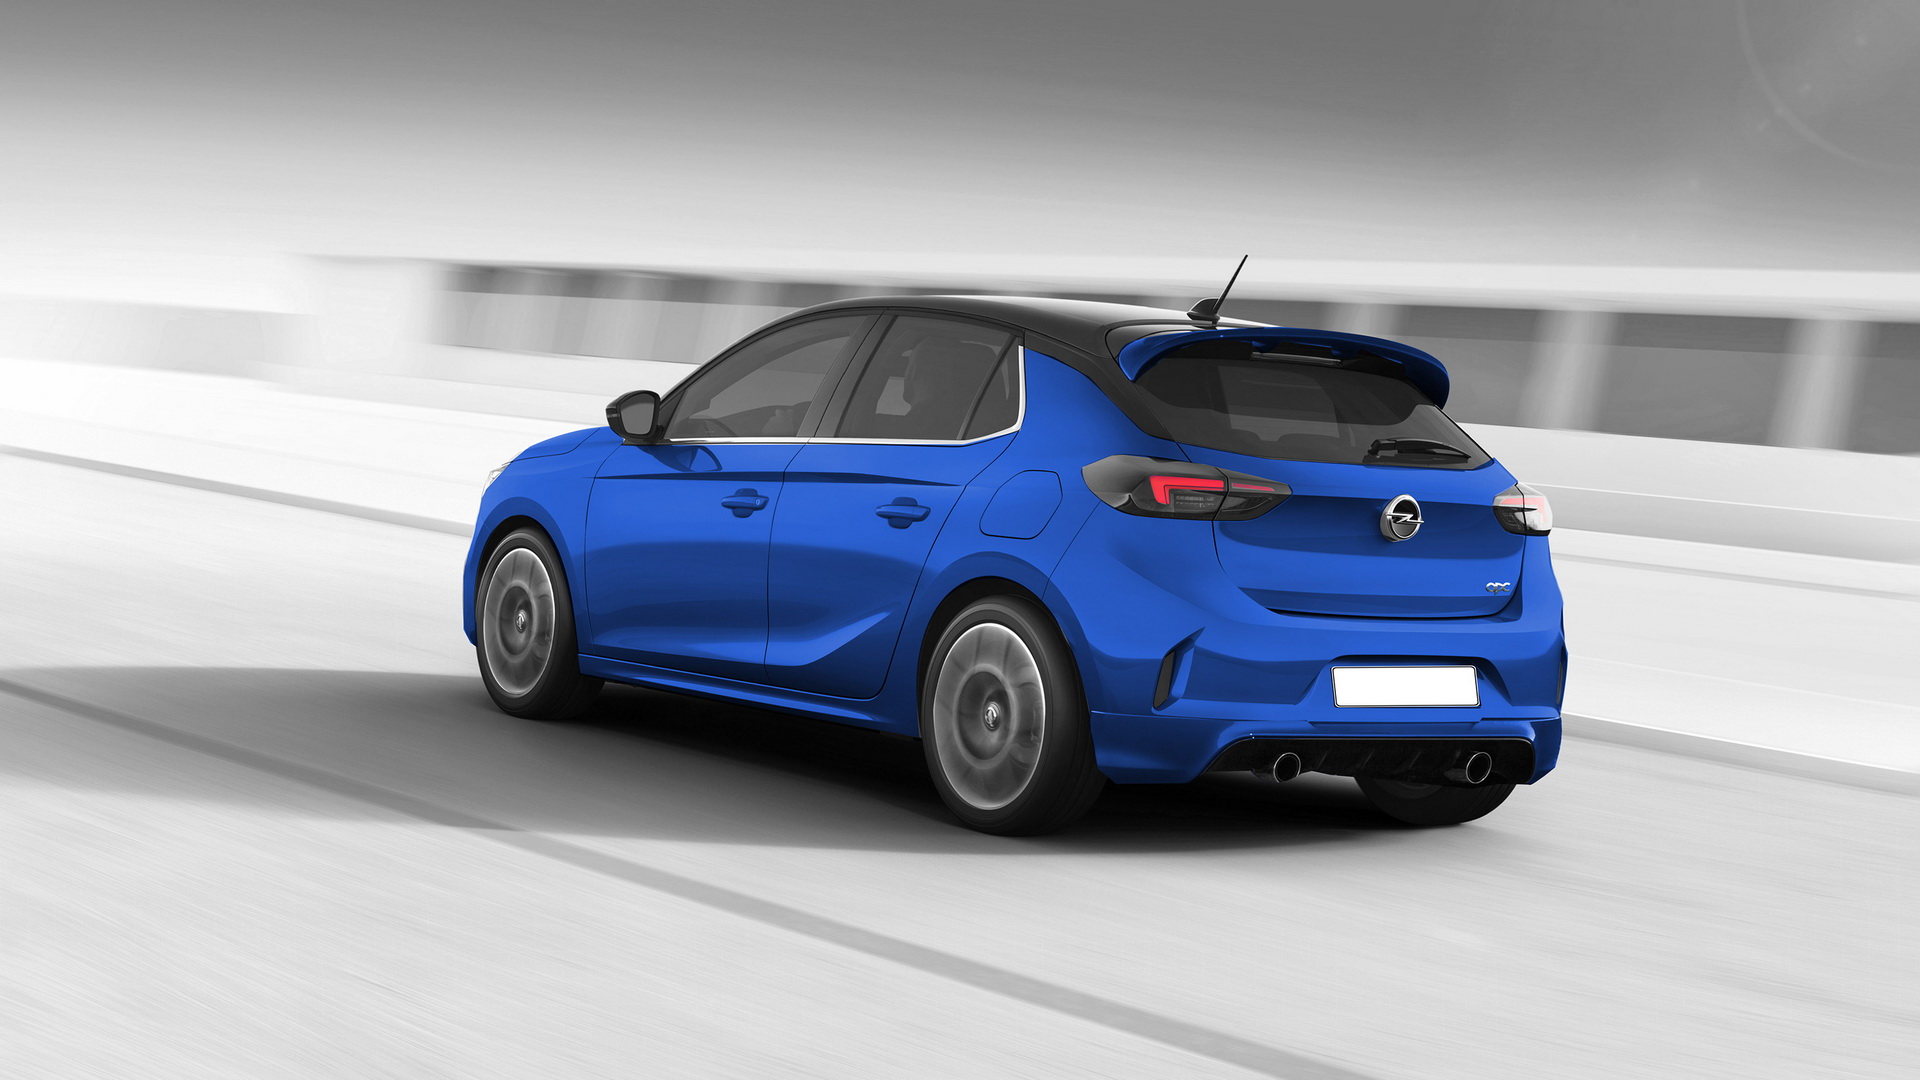 Opel/Vauhall Corsa OPC/VXR Tipped To Return As Ford Fiesta ST